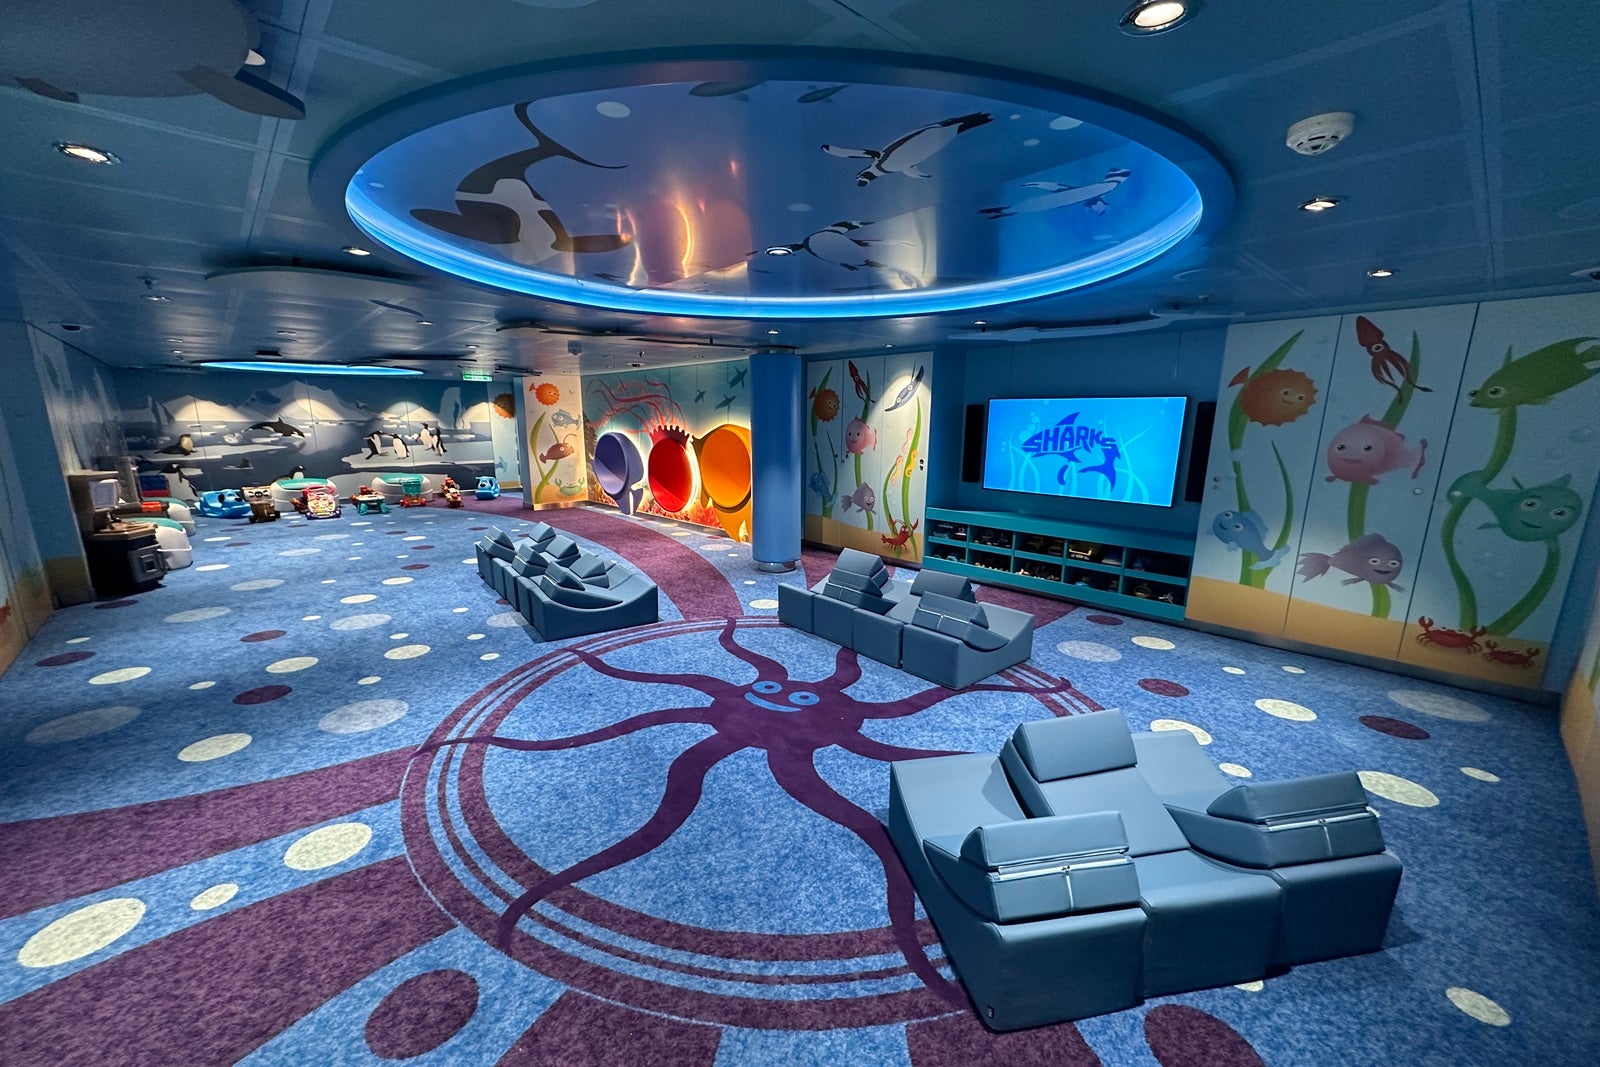 A large room with seating alcoves, a TV and activity areas for kids